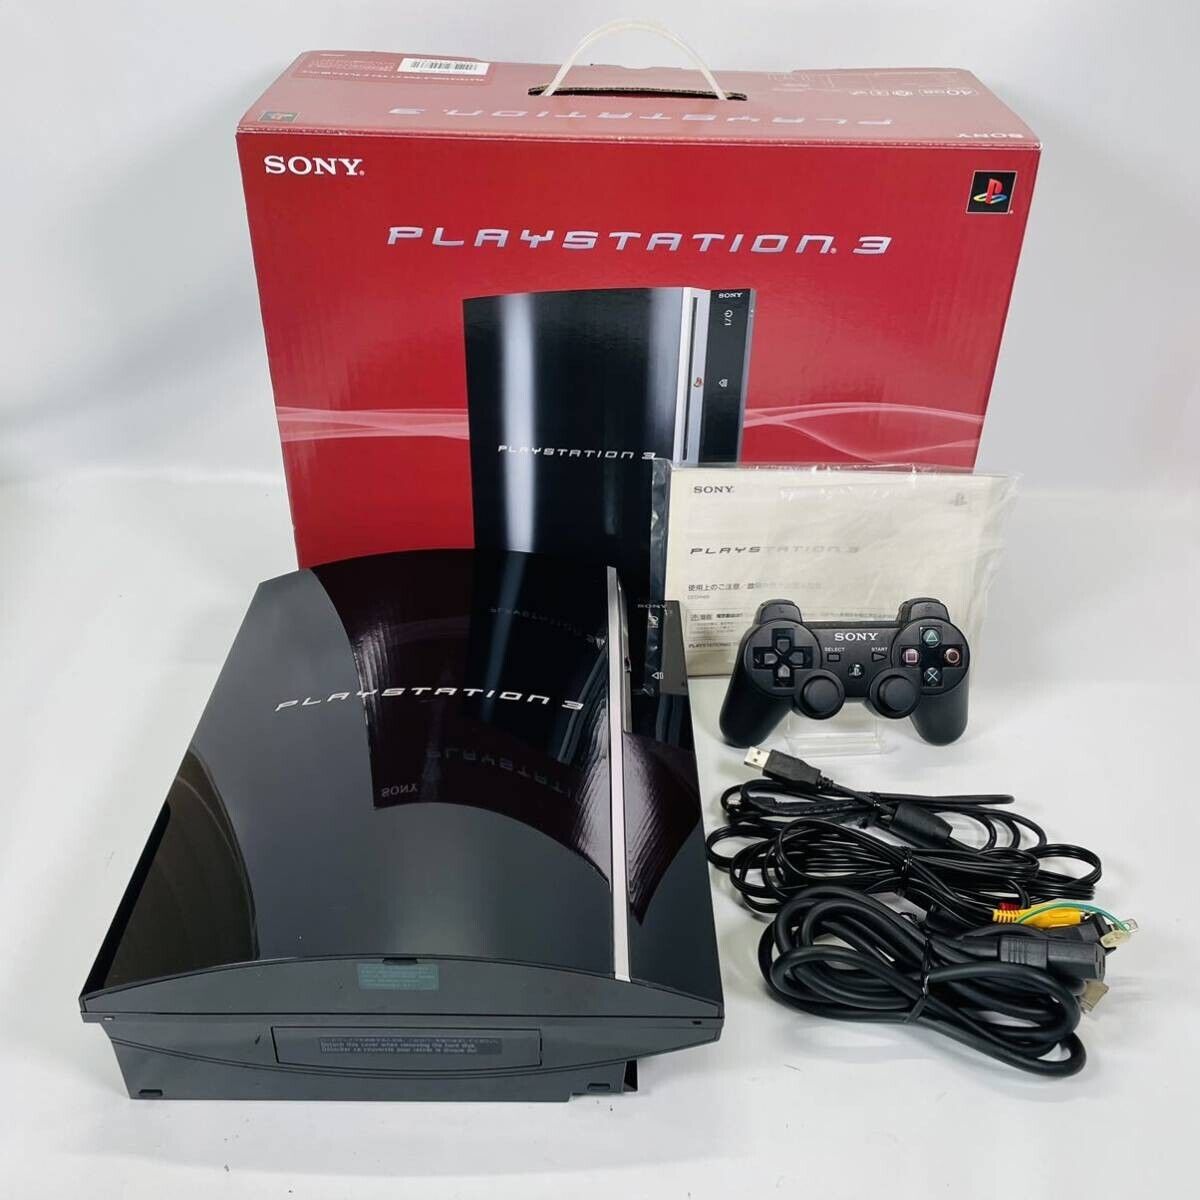 PLAYSTATION 3 (40GB) PS3 sony Clear black CECHH00 japan Video Game Console